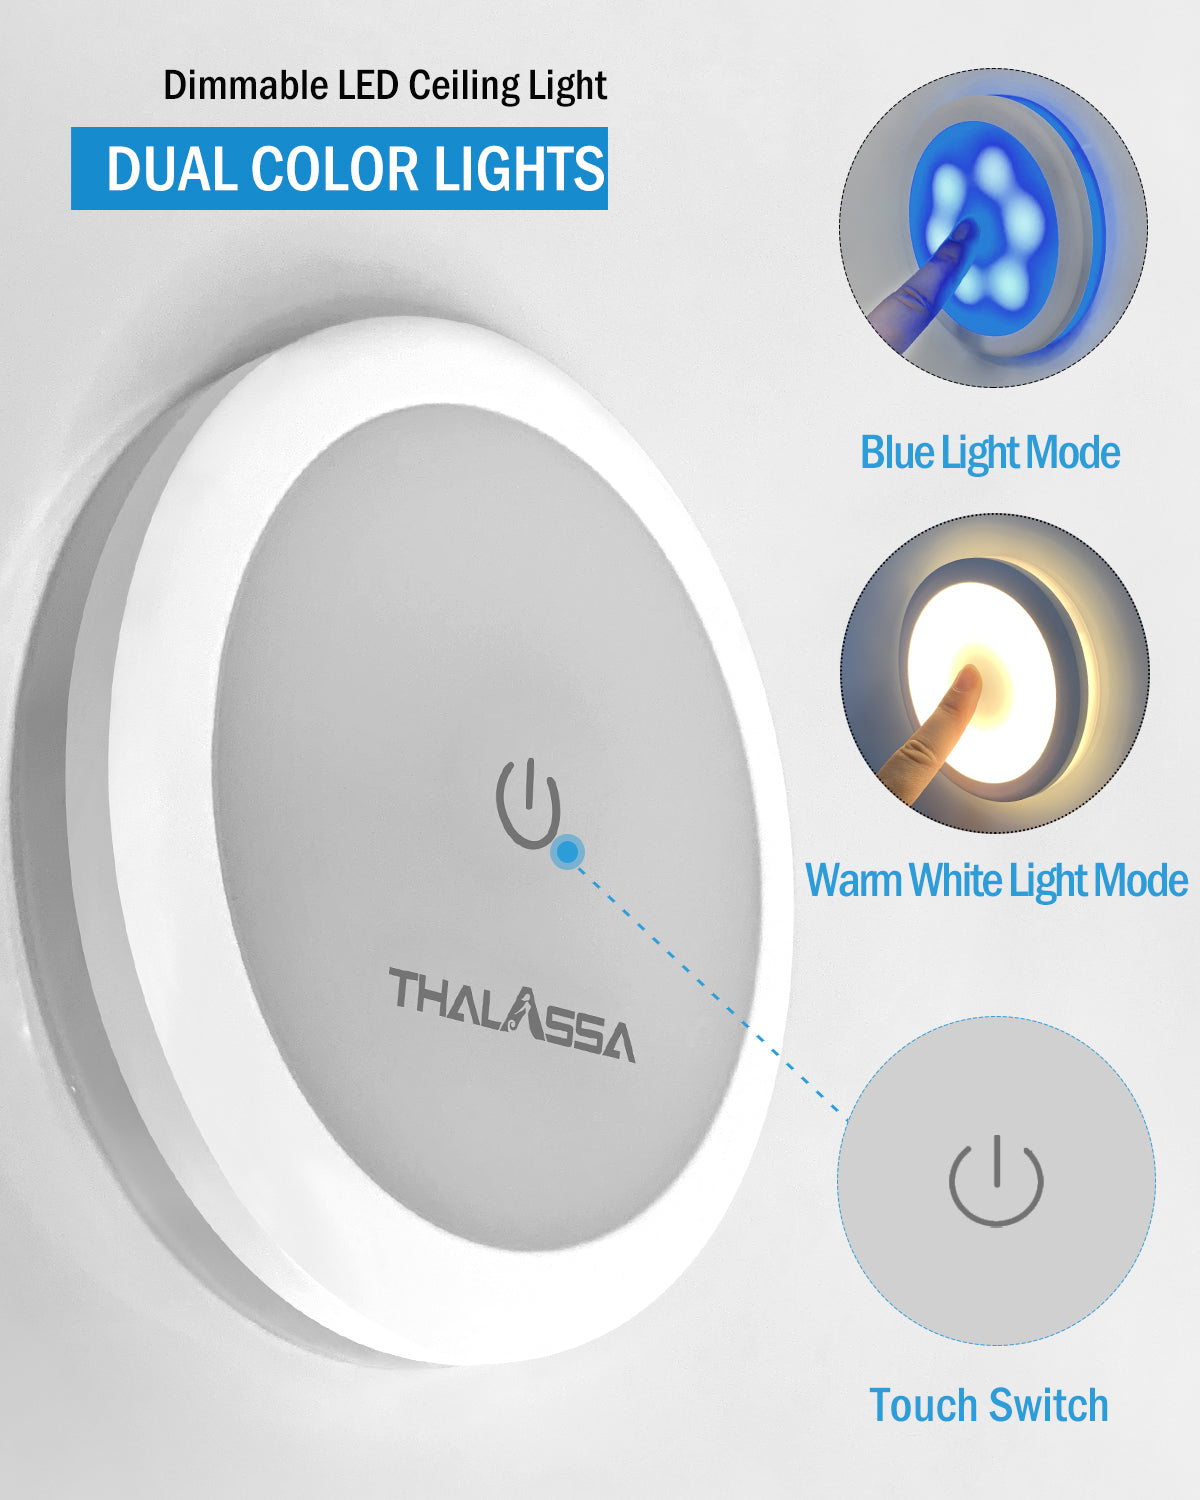 Dual Color 12v Led Boat Ceiling Light with Dimmable Touch Switch Surfa – Thalassa Marine